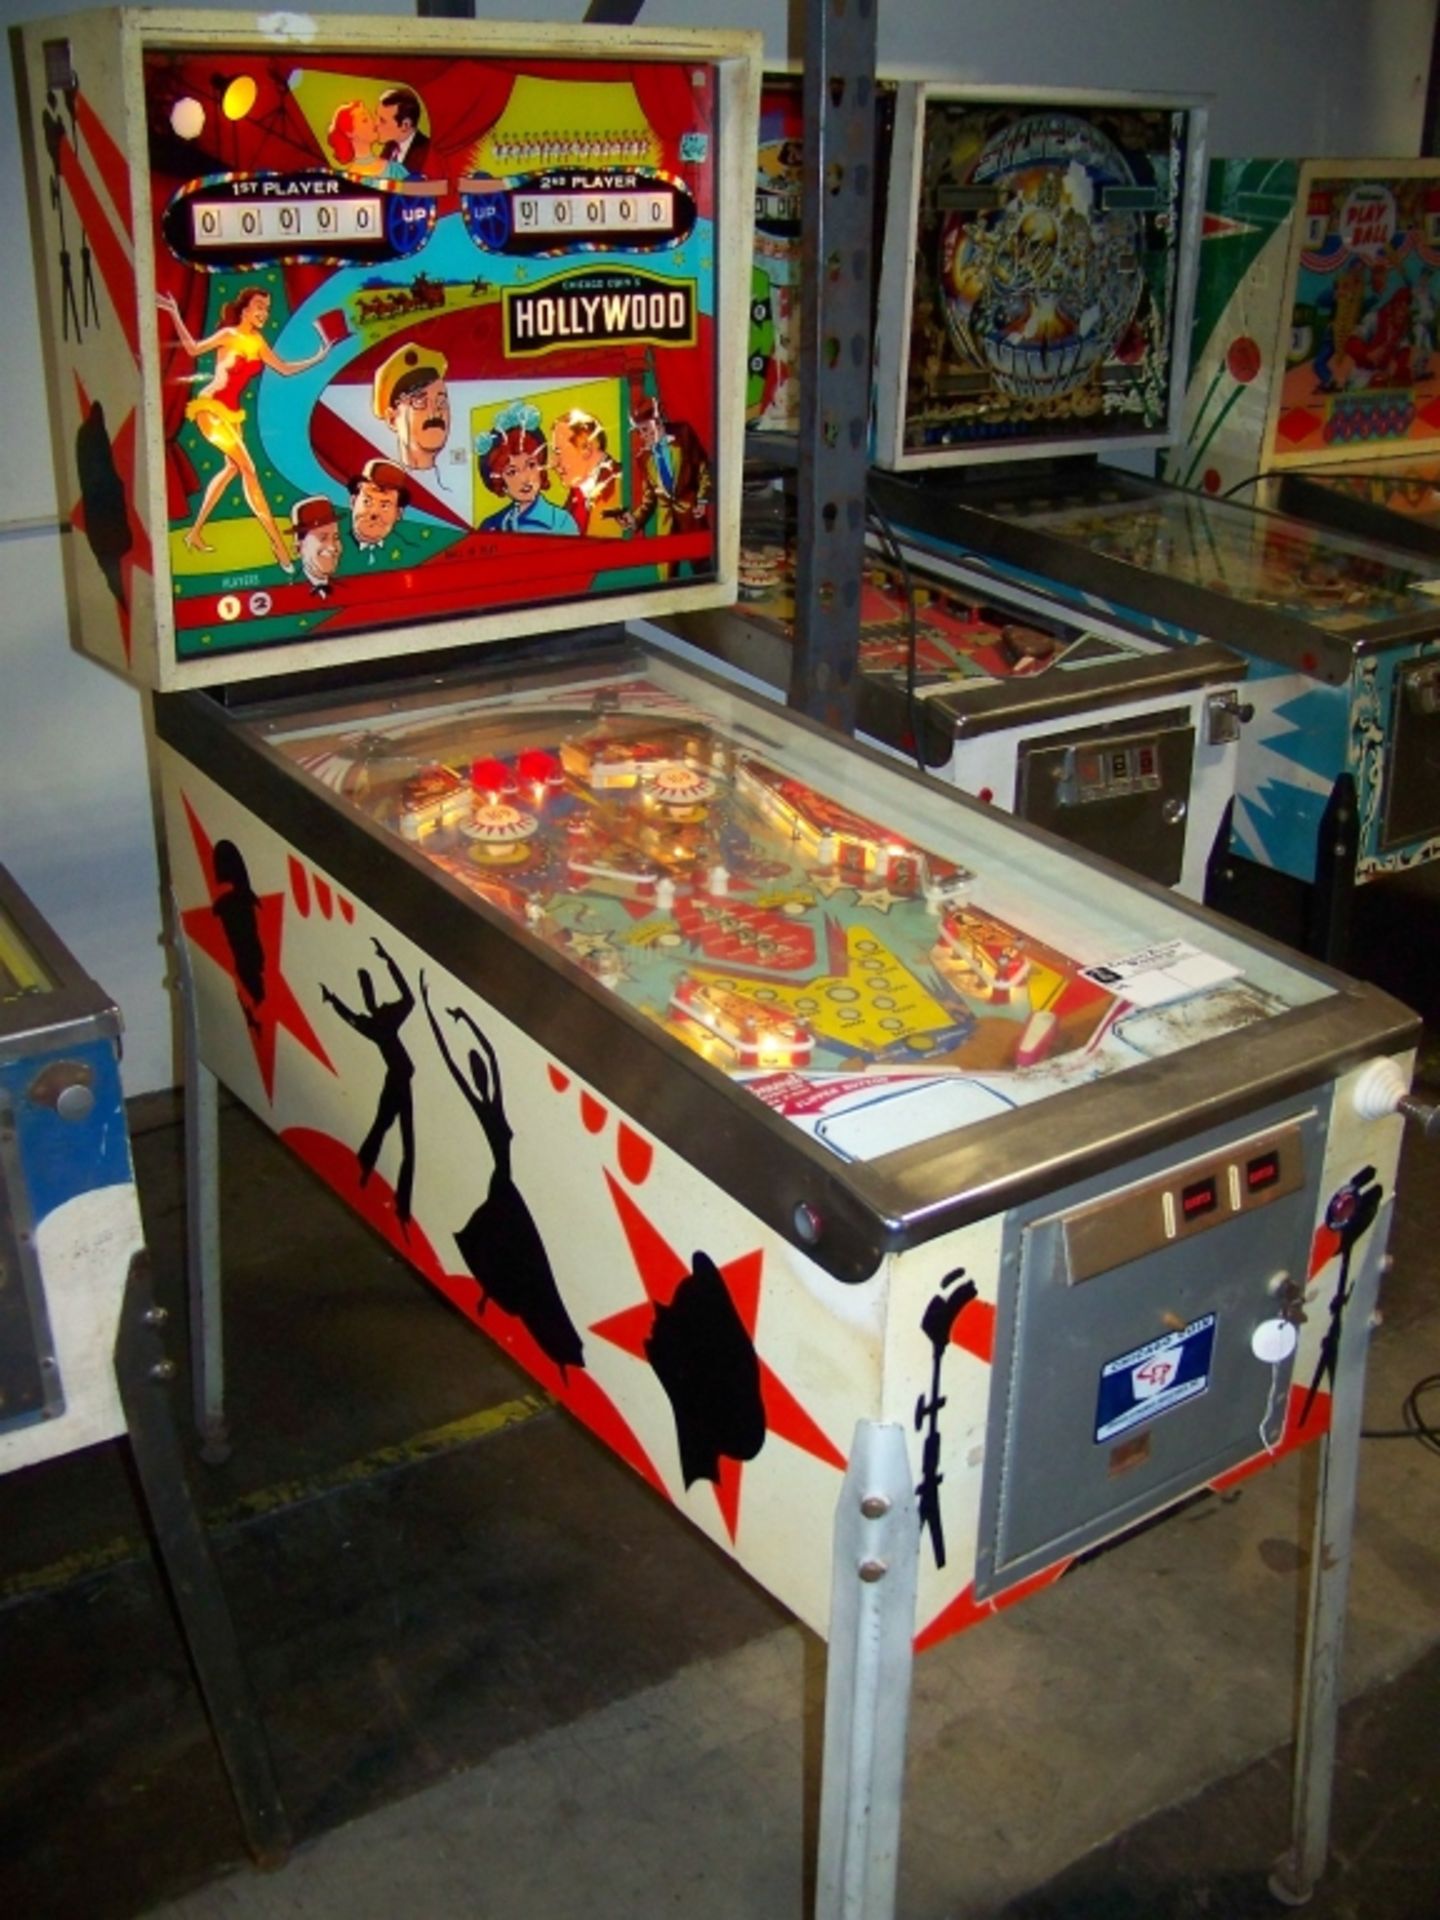 HOLLYWOOD PINBALL MACHINE CHICAGO COIN 1976 Item is in used condition. Evidence of wear and